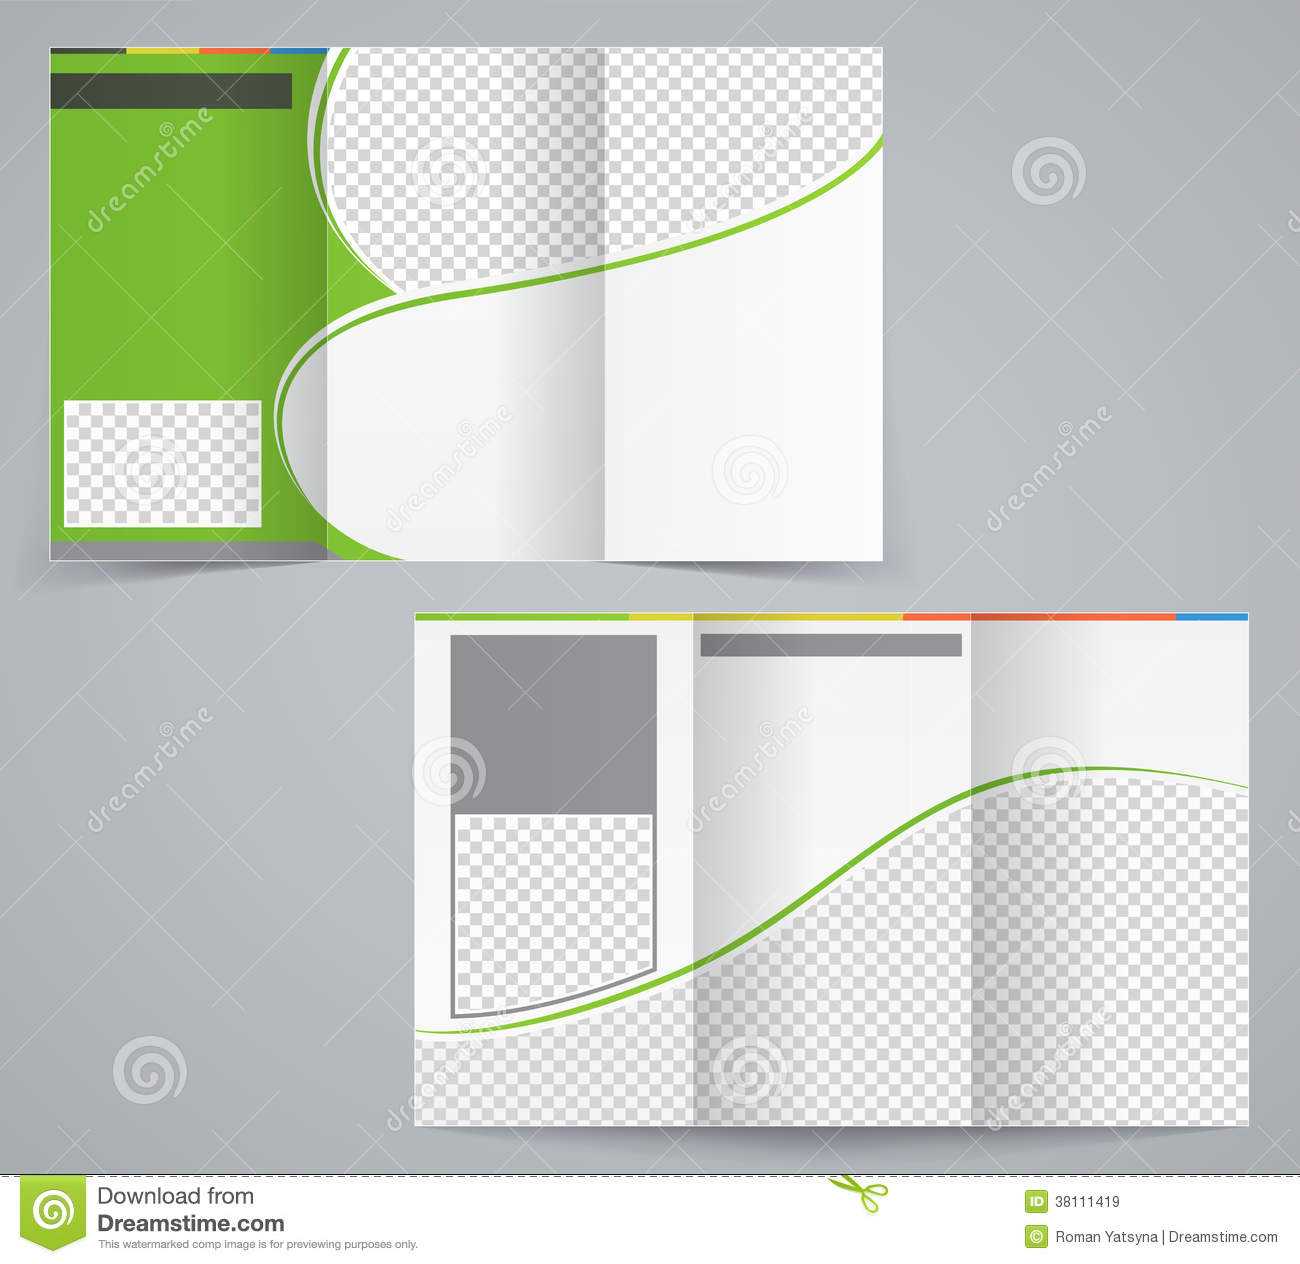 Tri Fold Business Brochure Template, Vector Green Stock Throughout Illustrator Brochure Templates Free Download